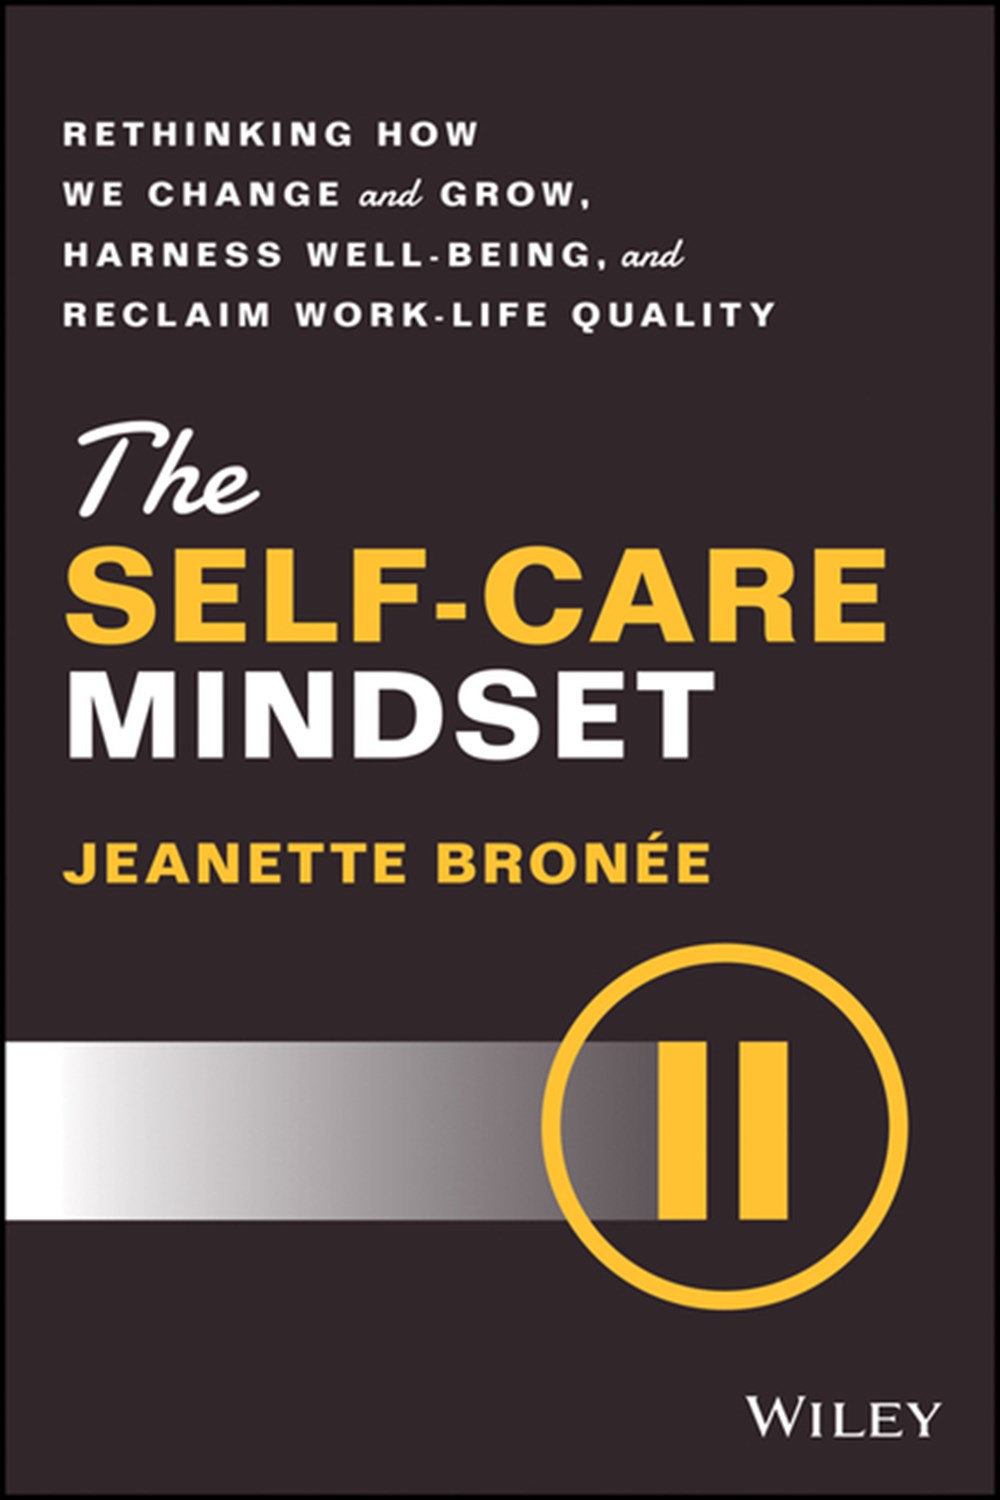 Self-Care Mindset: Rethinking How We Change and Grow, Harness Well-Being, and Reclaim Work-Life Qual